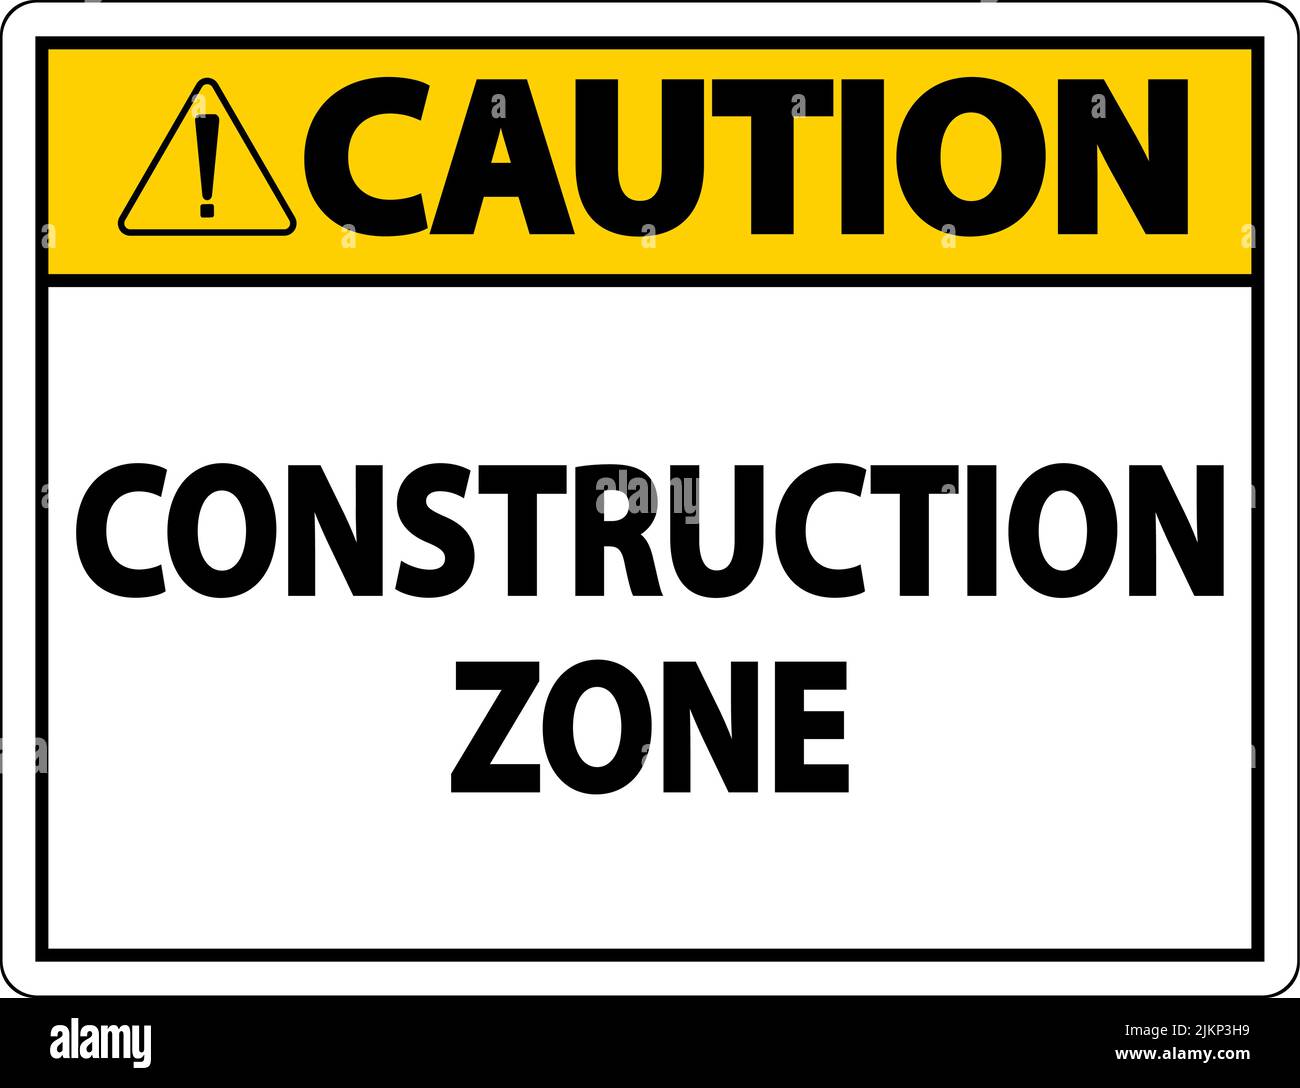 Caution Construction Zone Symbol Sign On White Background Stock Vector ...